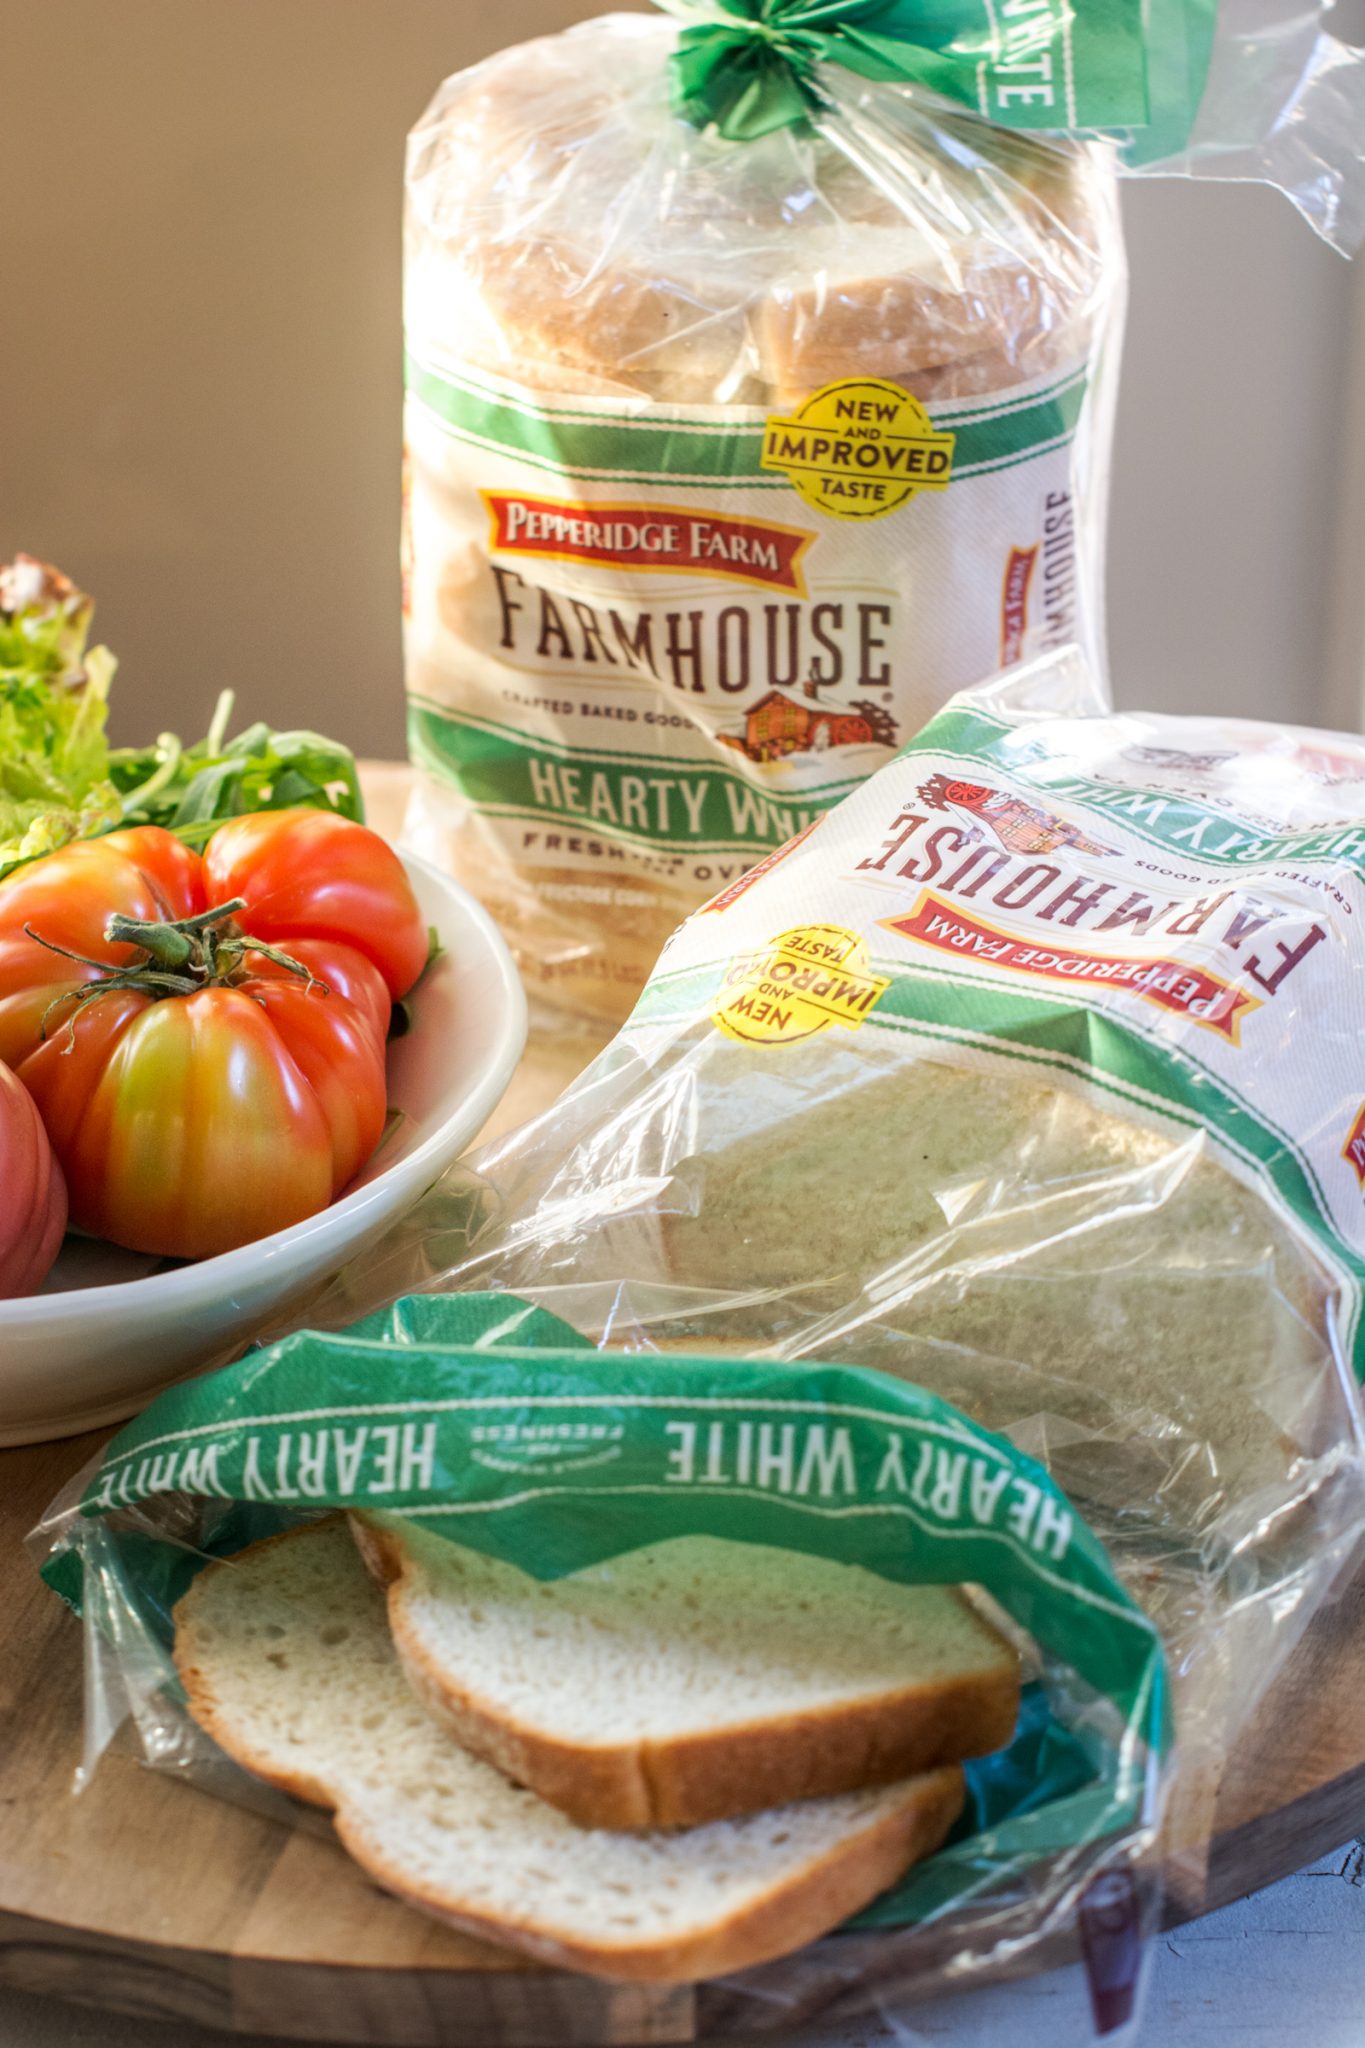 Pepperidge Farm hearty white bread in wrapping beside a bowl of tomatoes.